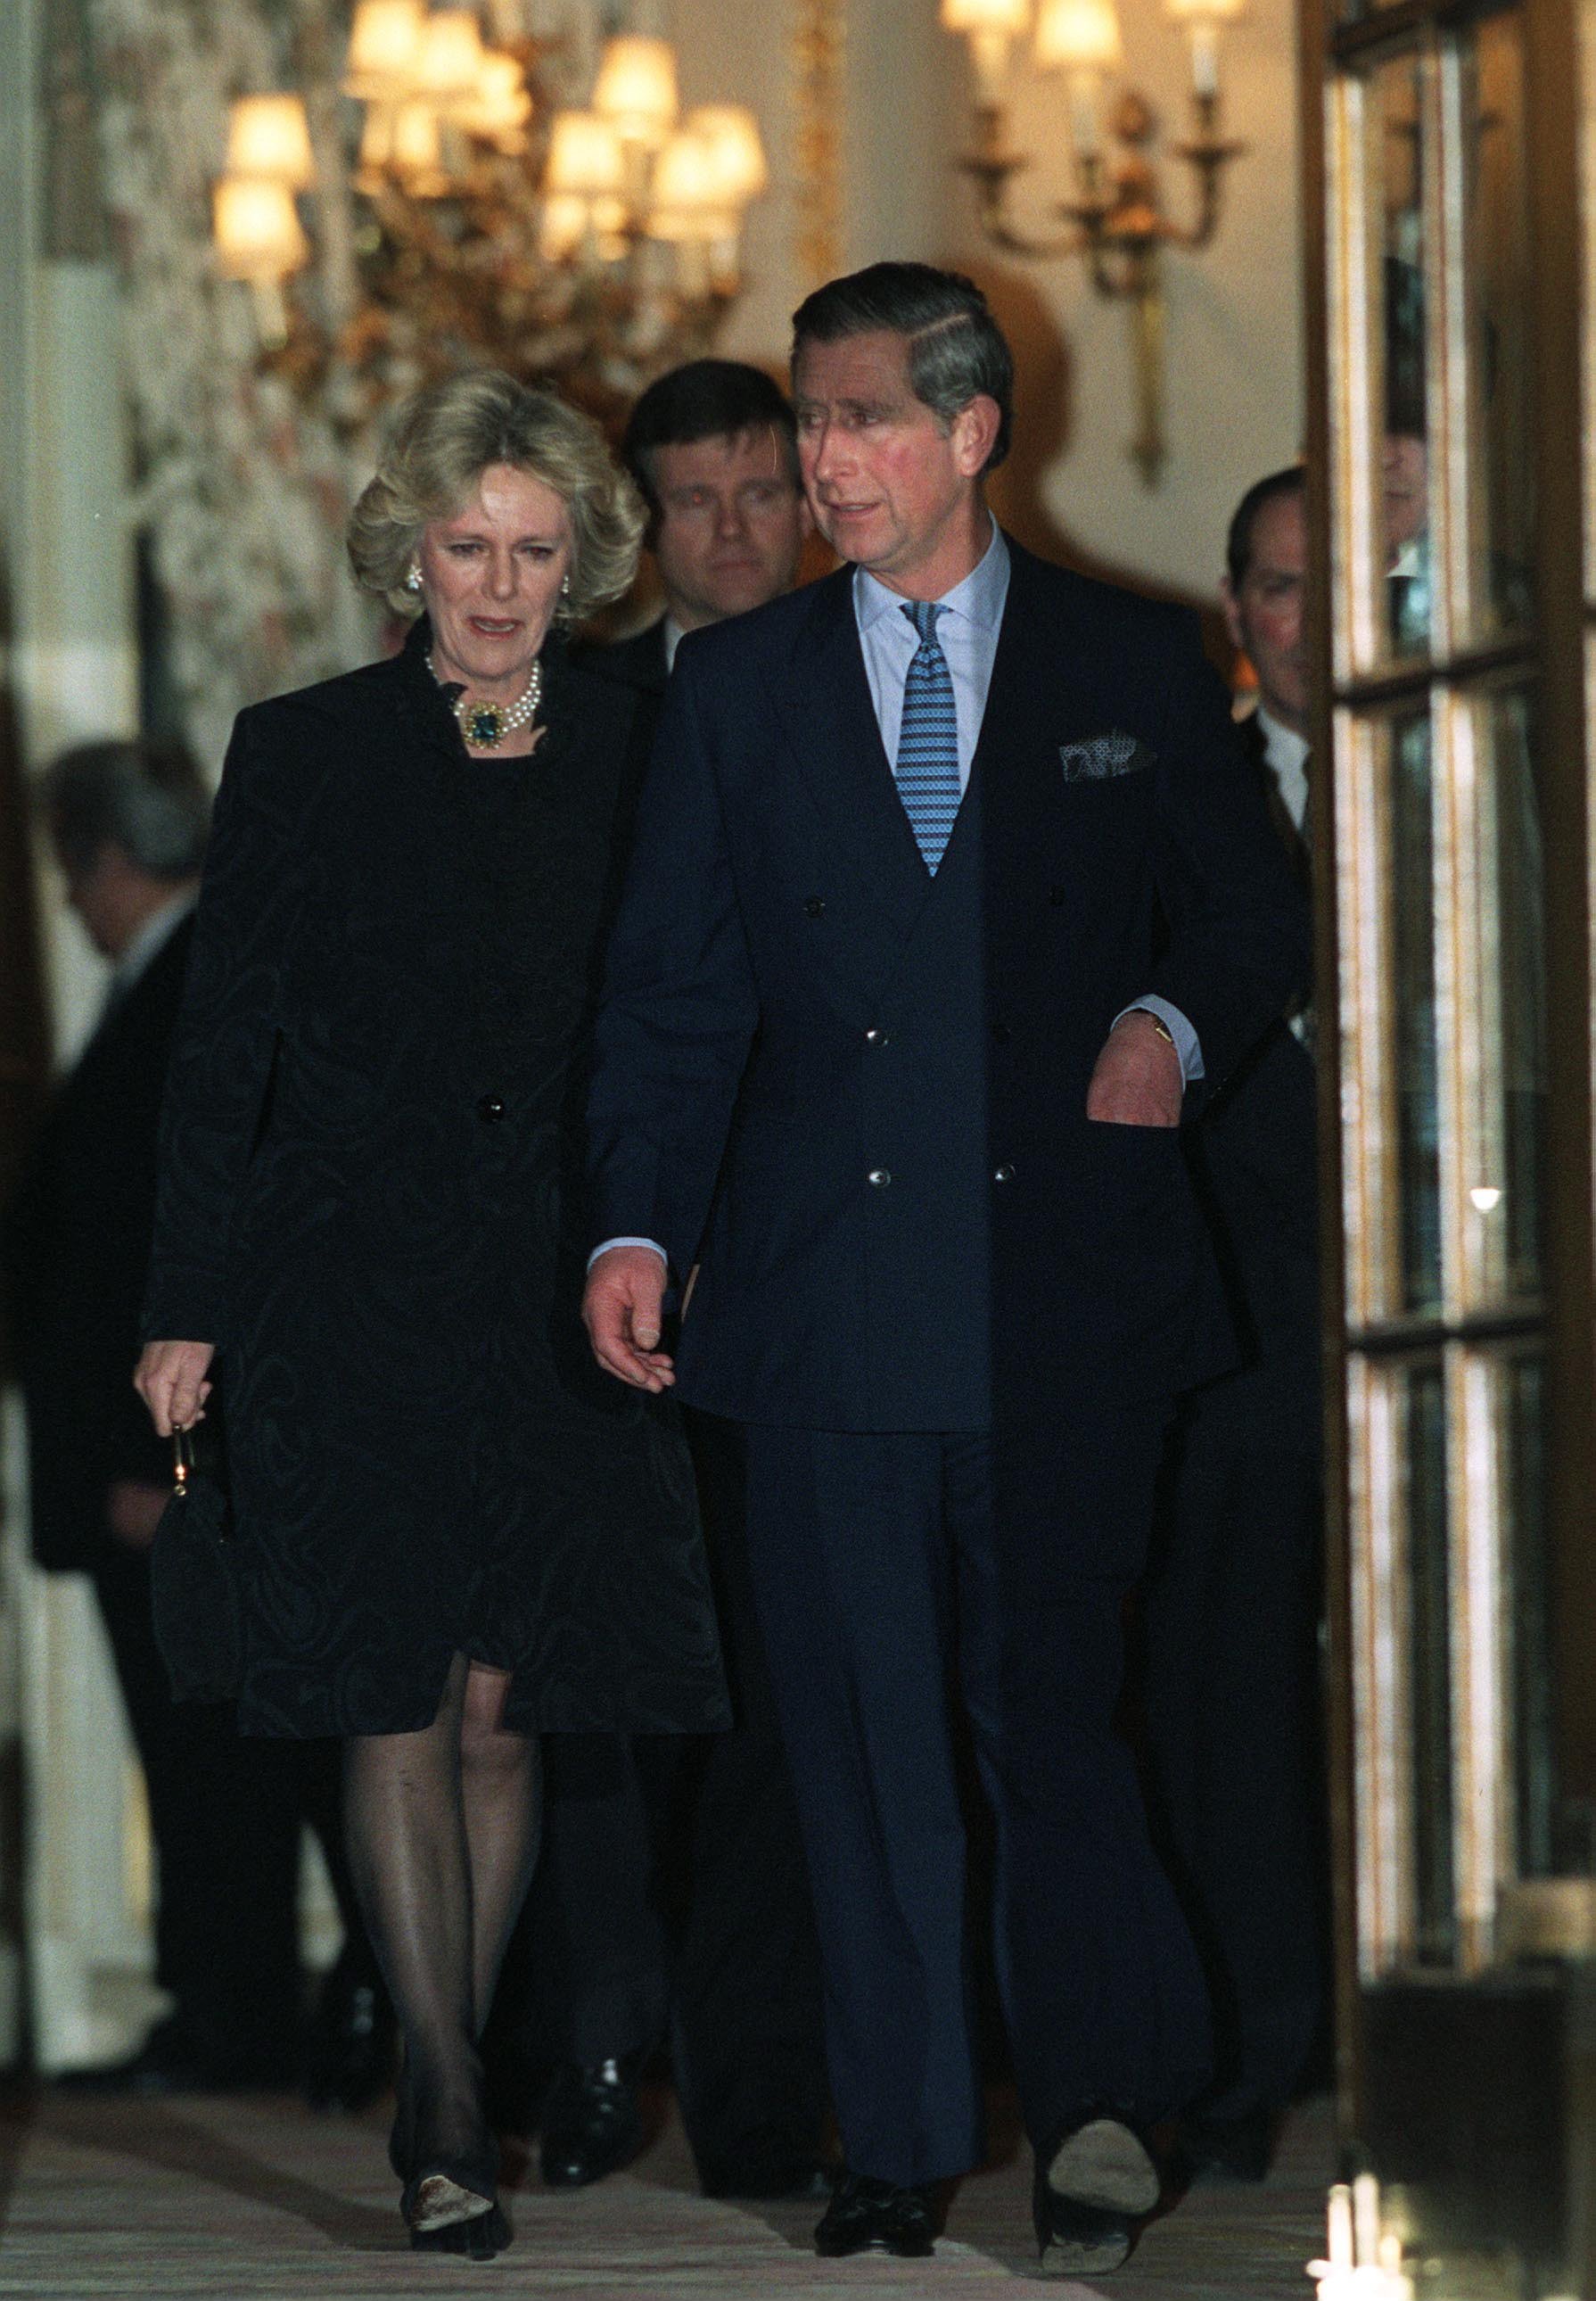 Prince Charles and Camilla Parker-Bowles leaving the Ritz Hotel in London after attending Camilla's sister's 50th birthday party on January 28, 1999 |  Source: Getty Images